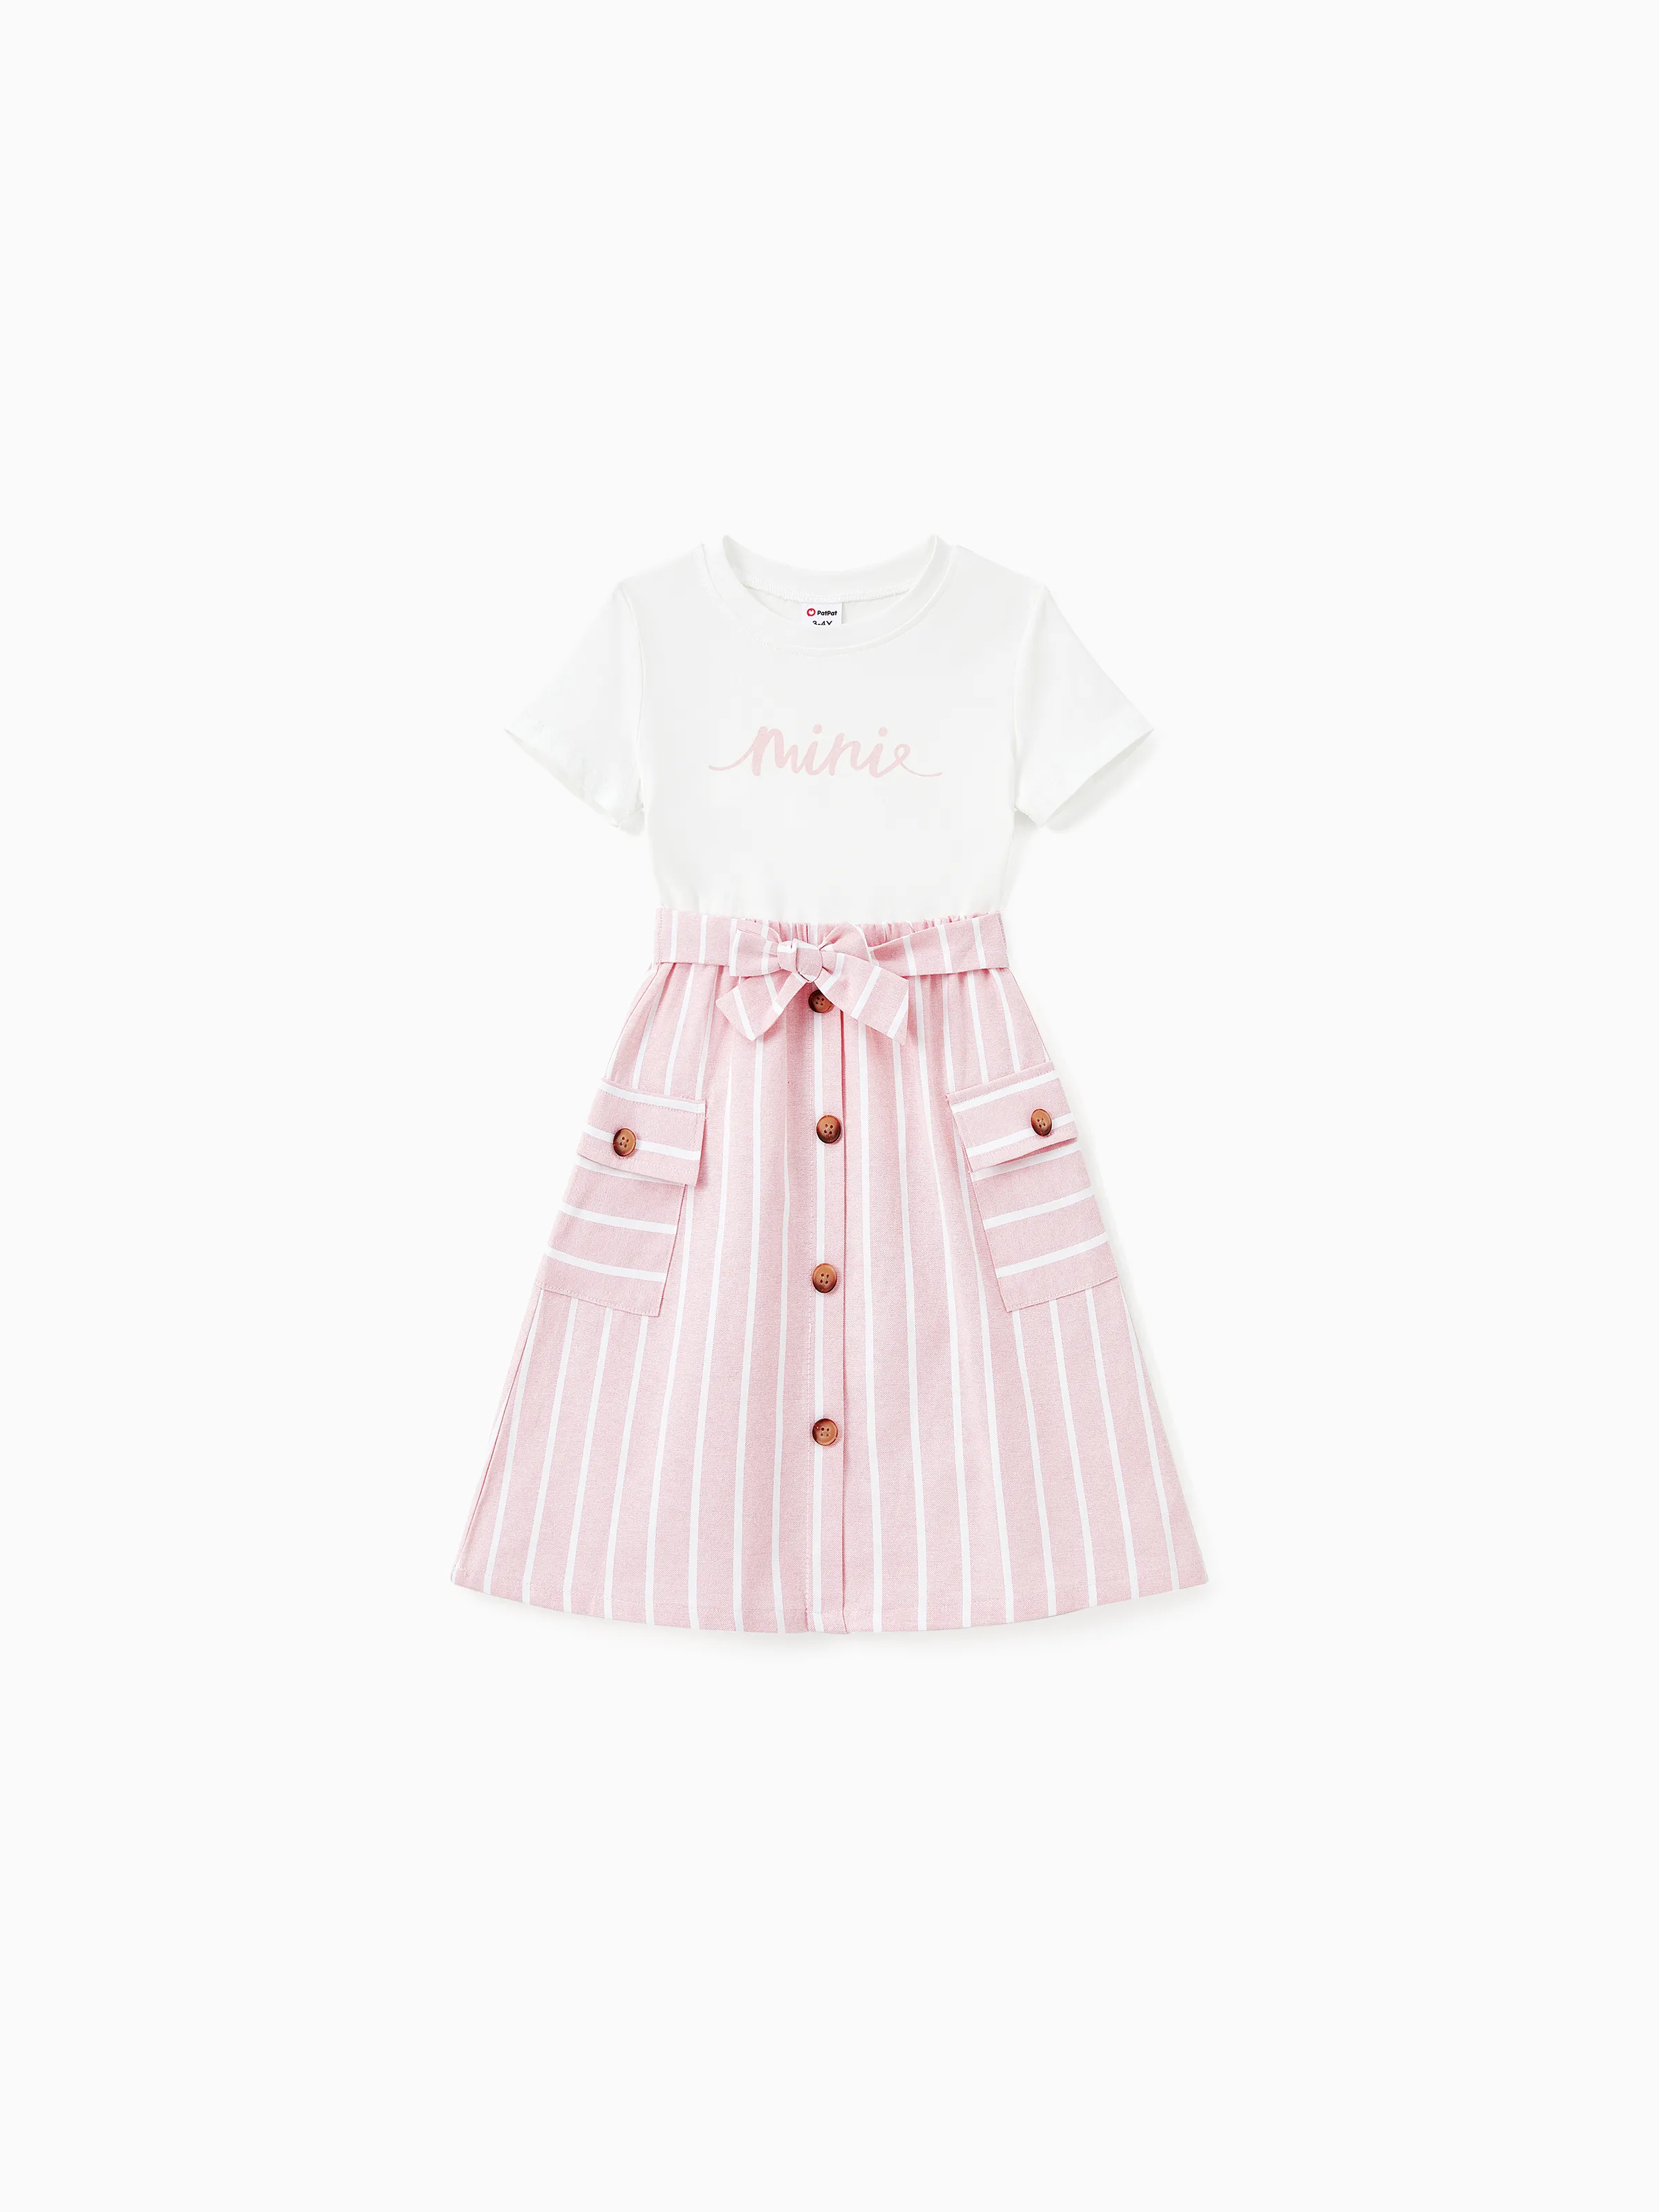 

Family Matching Sets Light Pink Striped Shirt or Belted Button Co-ord Set With Pockets